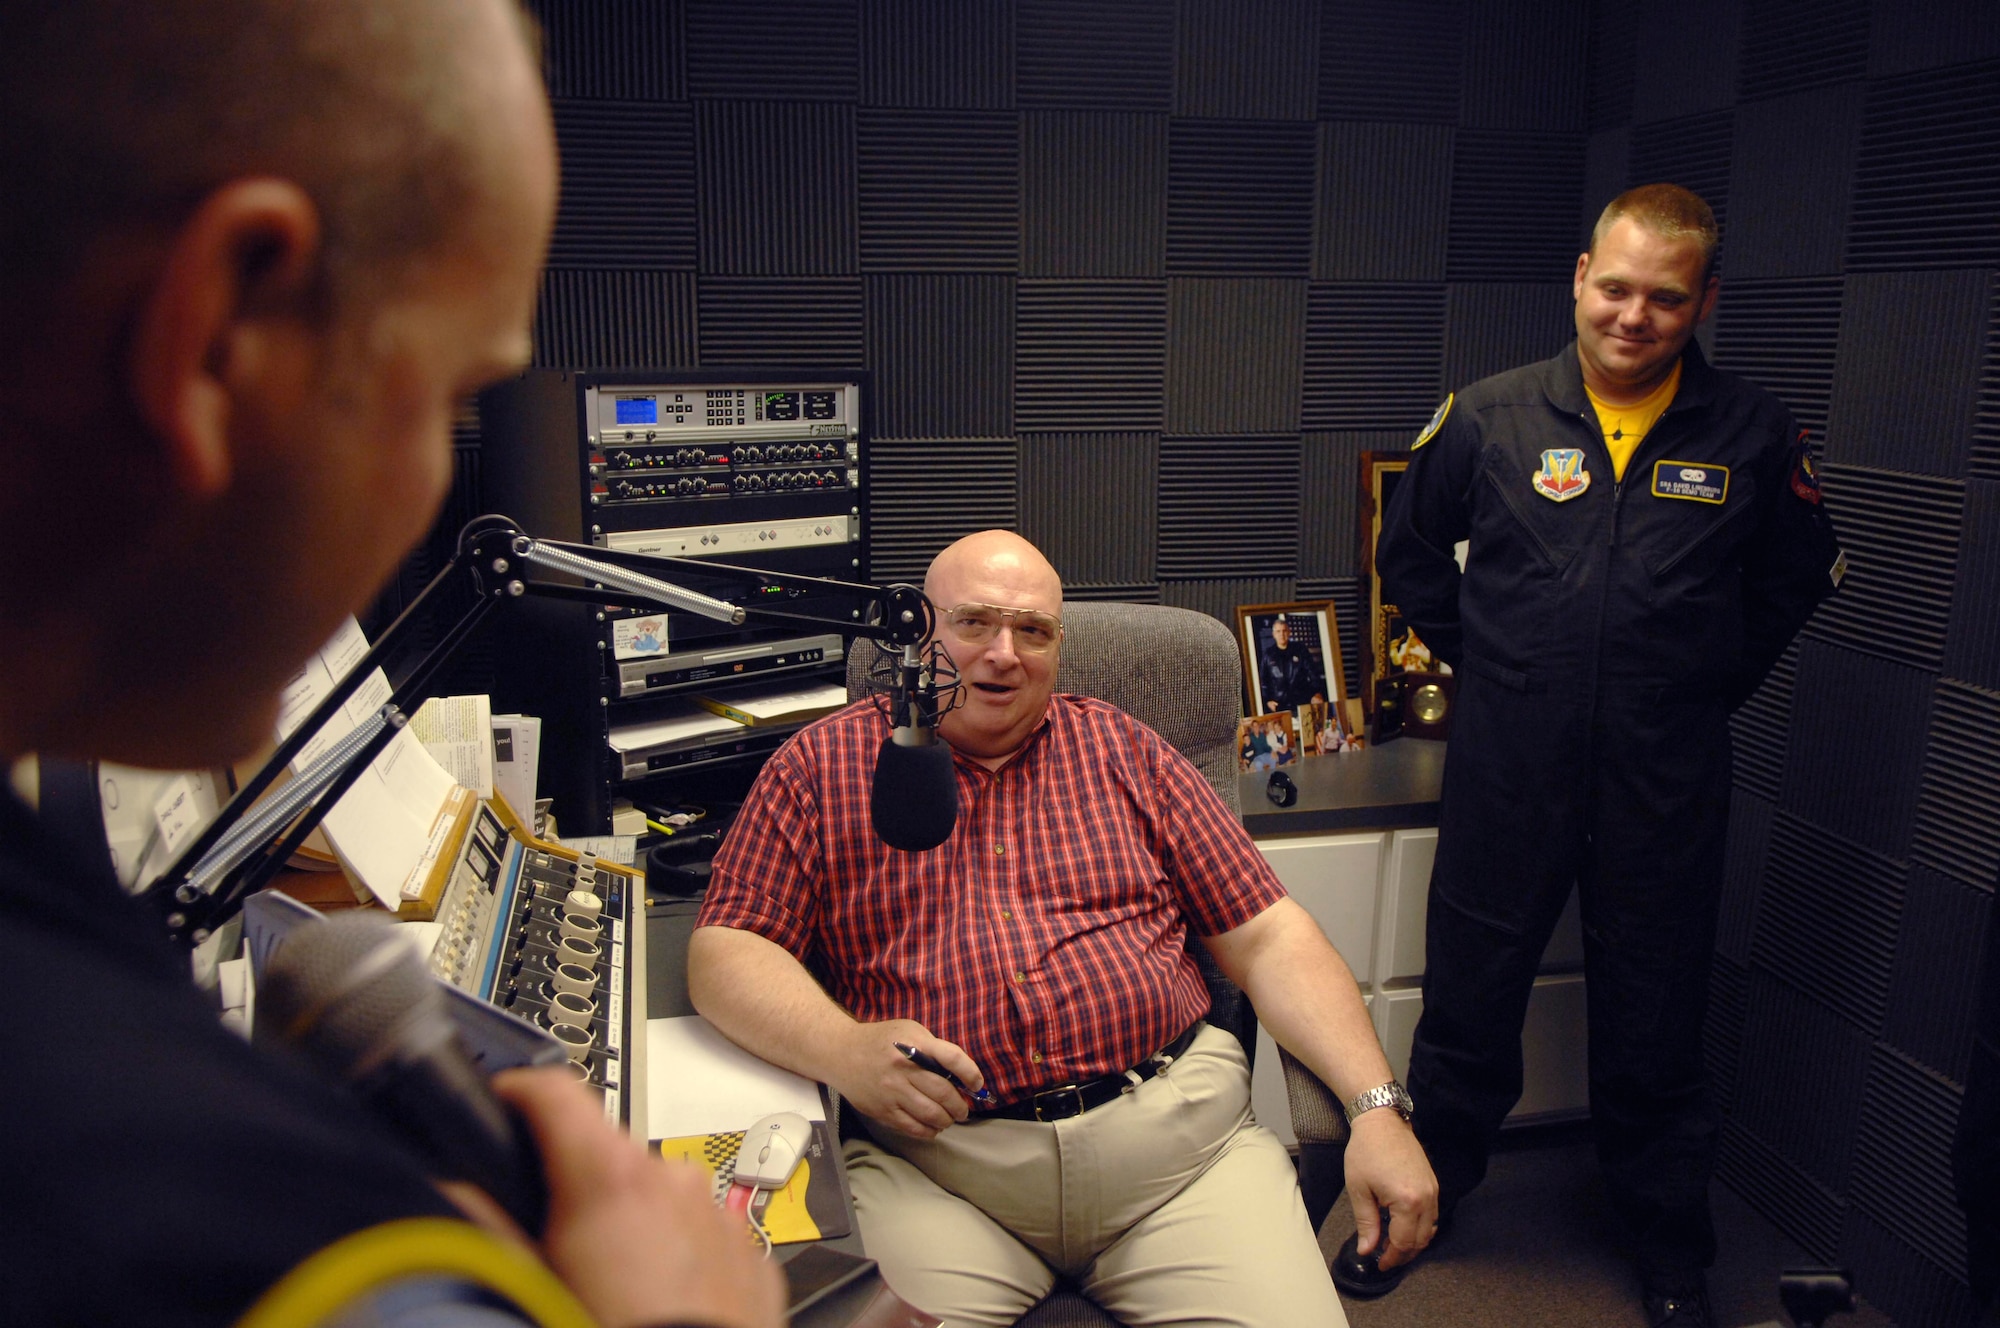 FLORENCE, S.C.-- Master Sgt. Bryan Spangler and Senior Airman David Linenburg, both F-16 Viper East Demonstration Team members, discuss why they joined the Air Force with Tom Kindard, radio host for Kinard 'N Koffee, on STAR 93.7 at Miller Communications May 22. The interview was broadcasted on a 6,000-watt signal covering a 40-mile radius with daytime coverage in Florence, Darlington, Hartsville, Timmonsville, Lake City and Bishopville. (U.S. Air Force photo/Staff Sgt. Nathan Bevier)